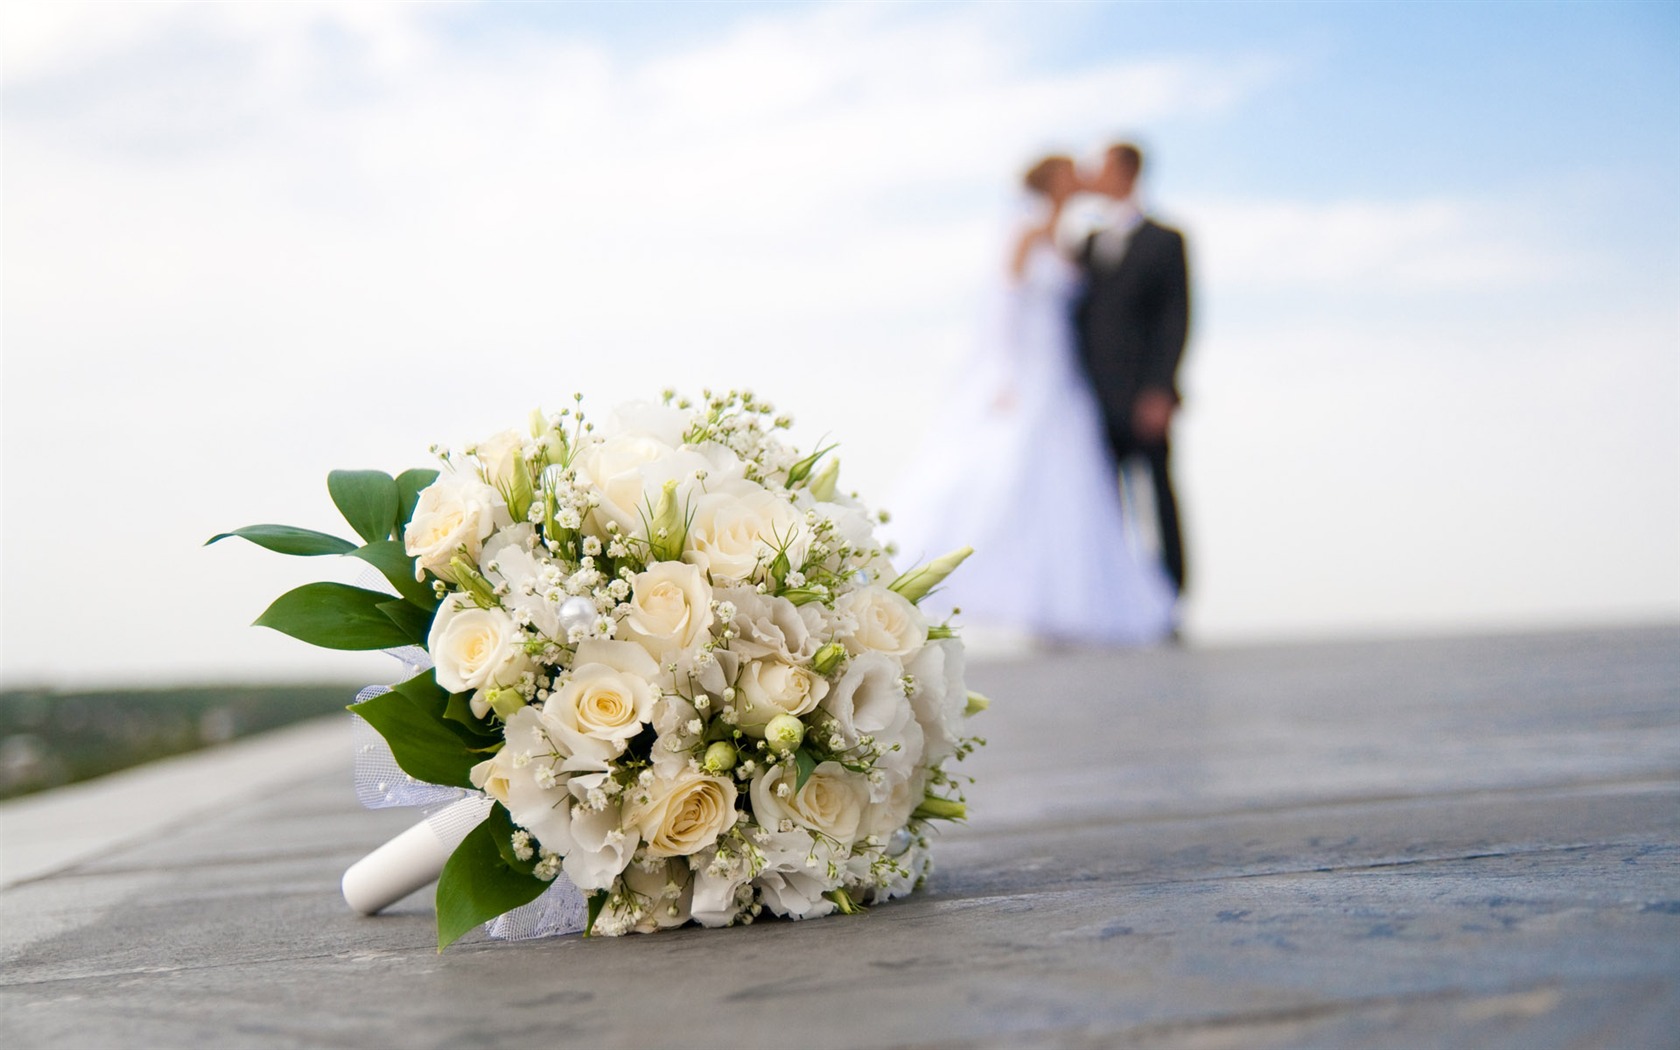 Weddings and Flowers wallpaper (2) #18 - 1680x1050